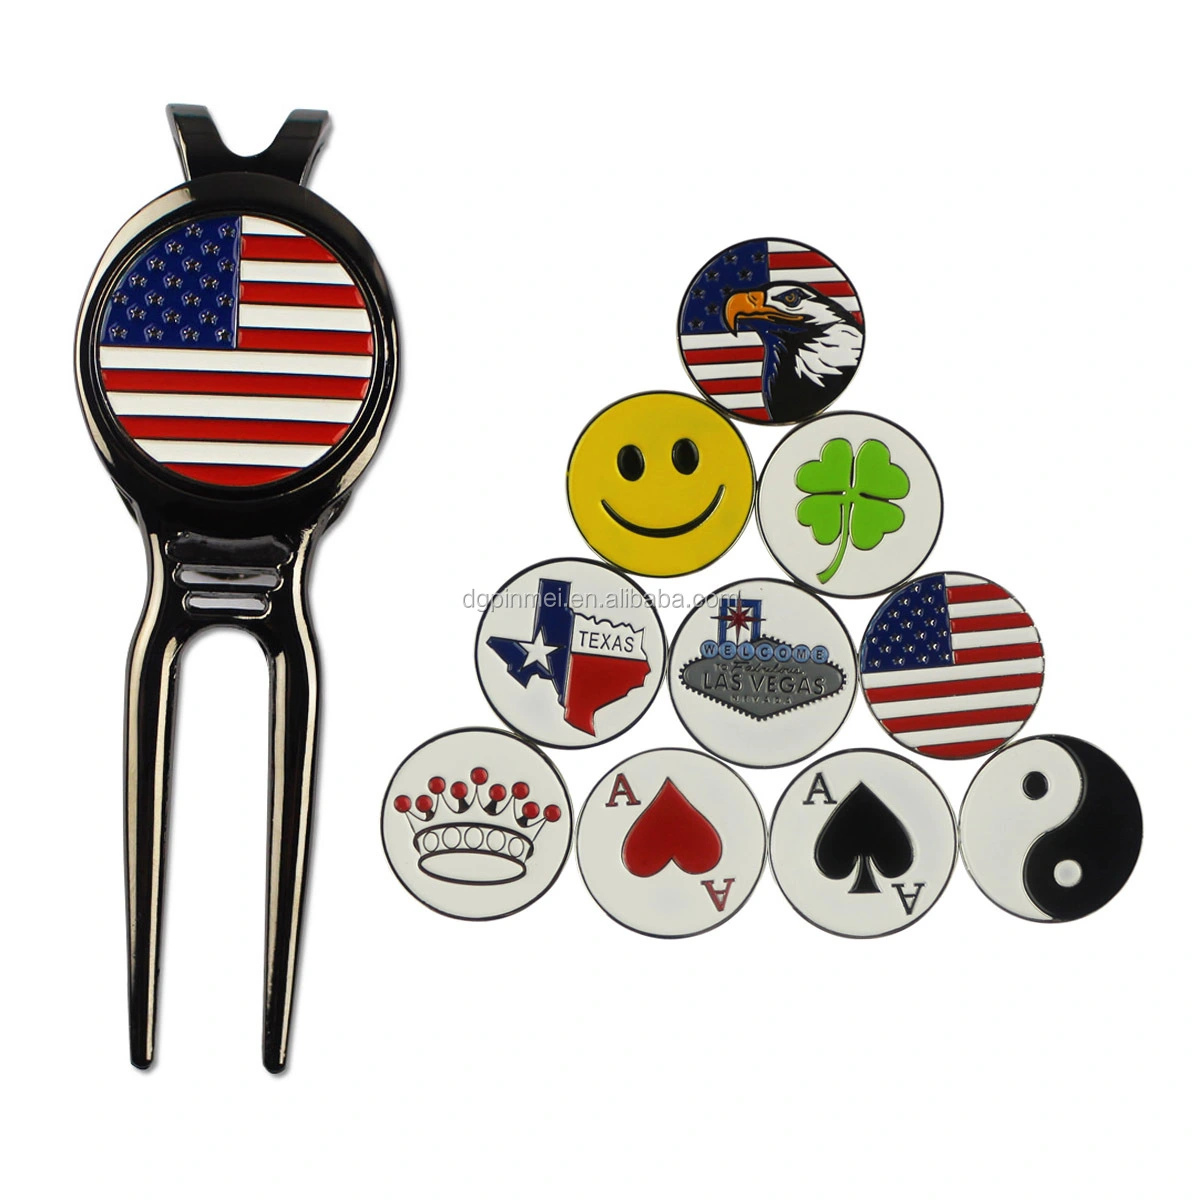 Personalized Customized Golf Divot Repair Tool Golf Divot Tool With Golf Ball Marker